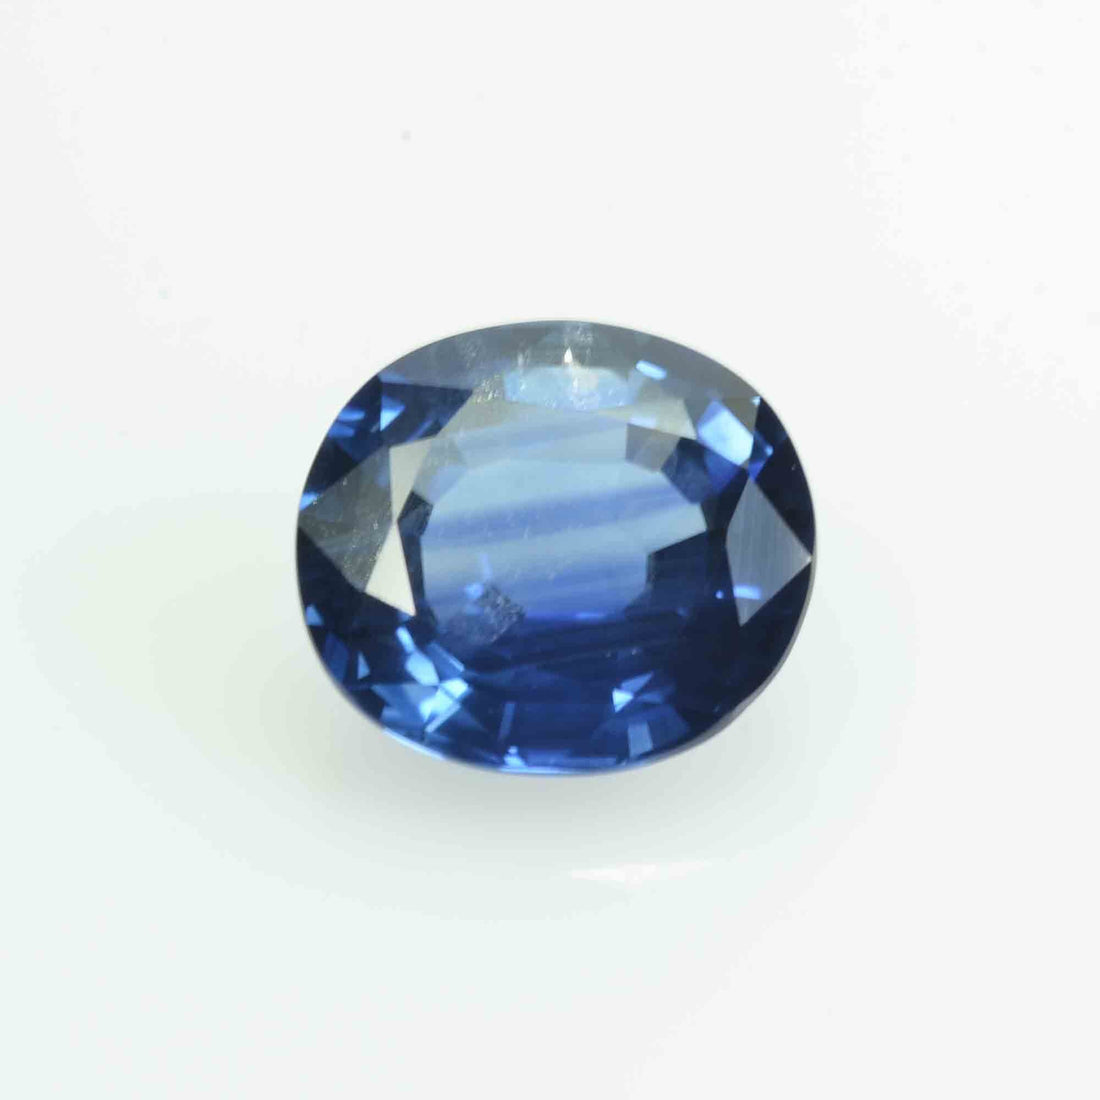 1.64 cts Natural Blue Sapphire Loose Gemstone Oval Cut